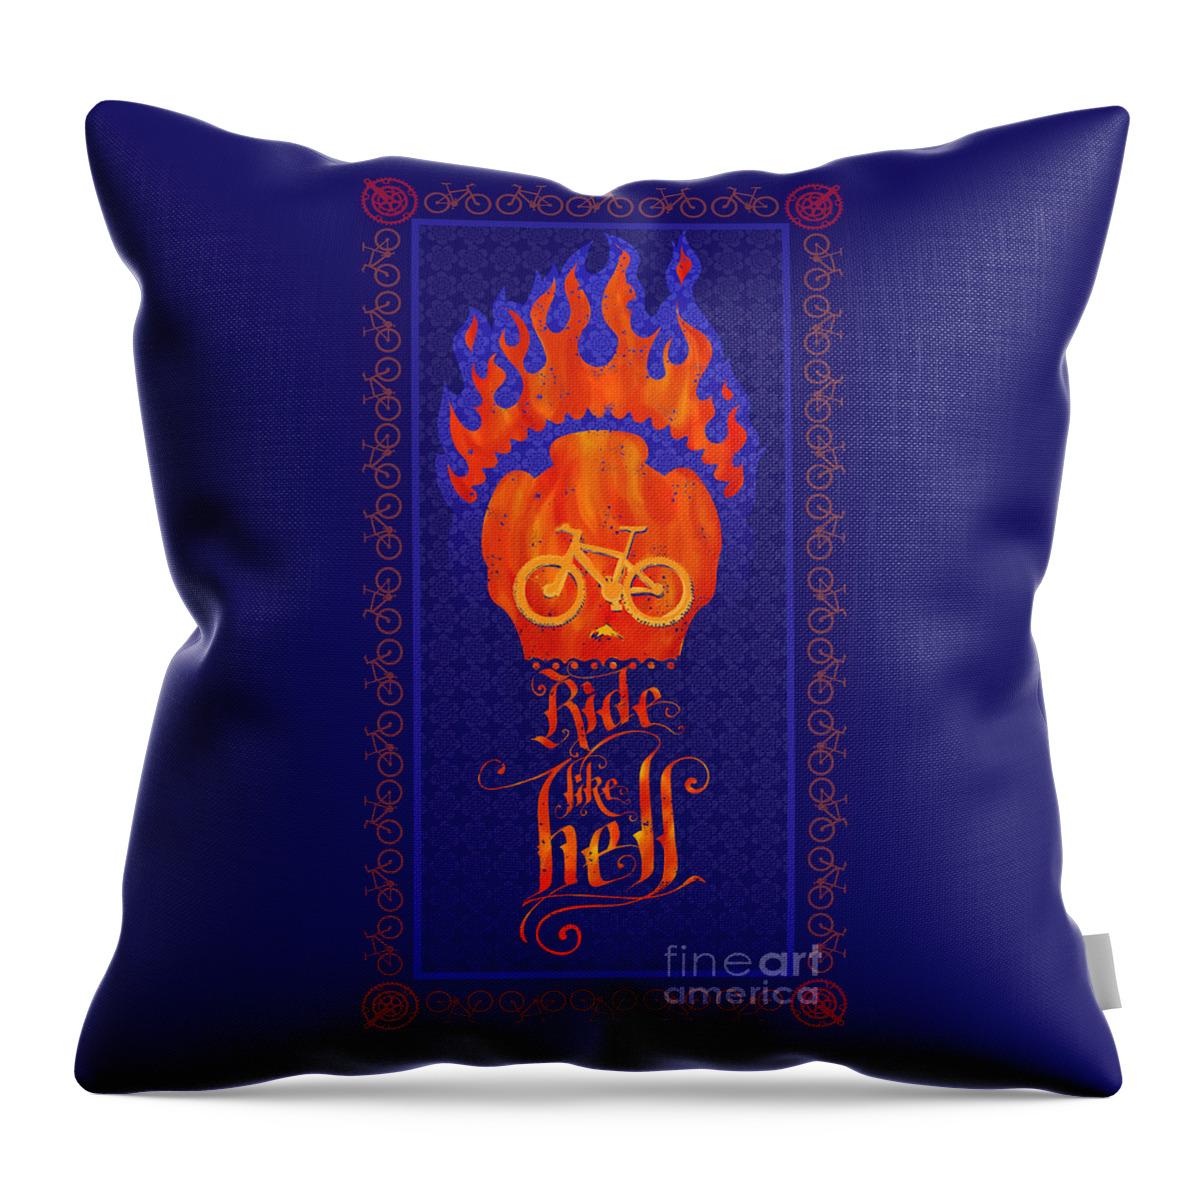 Cycling Poster Throw Pillow featuring the painting Ride Like Hell by Sassan Filsoof